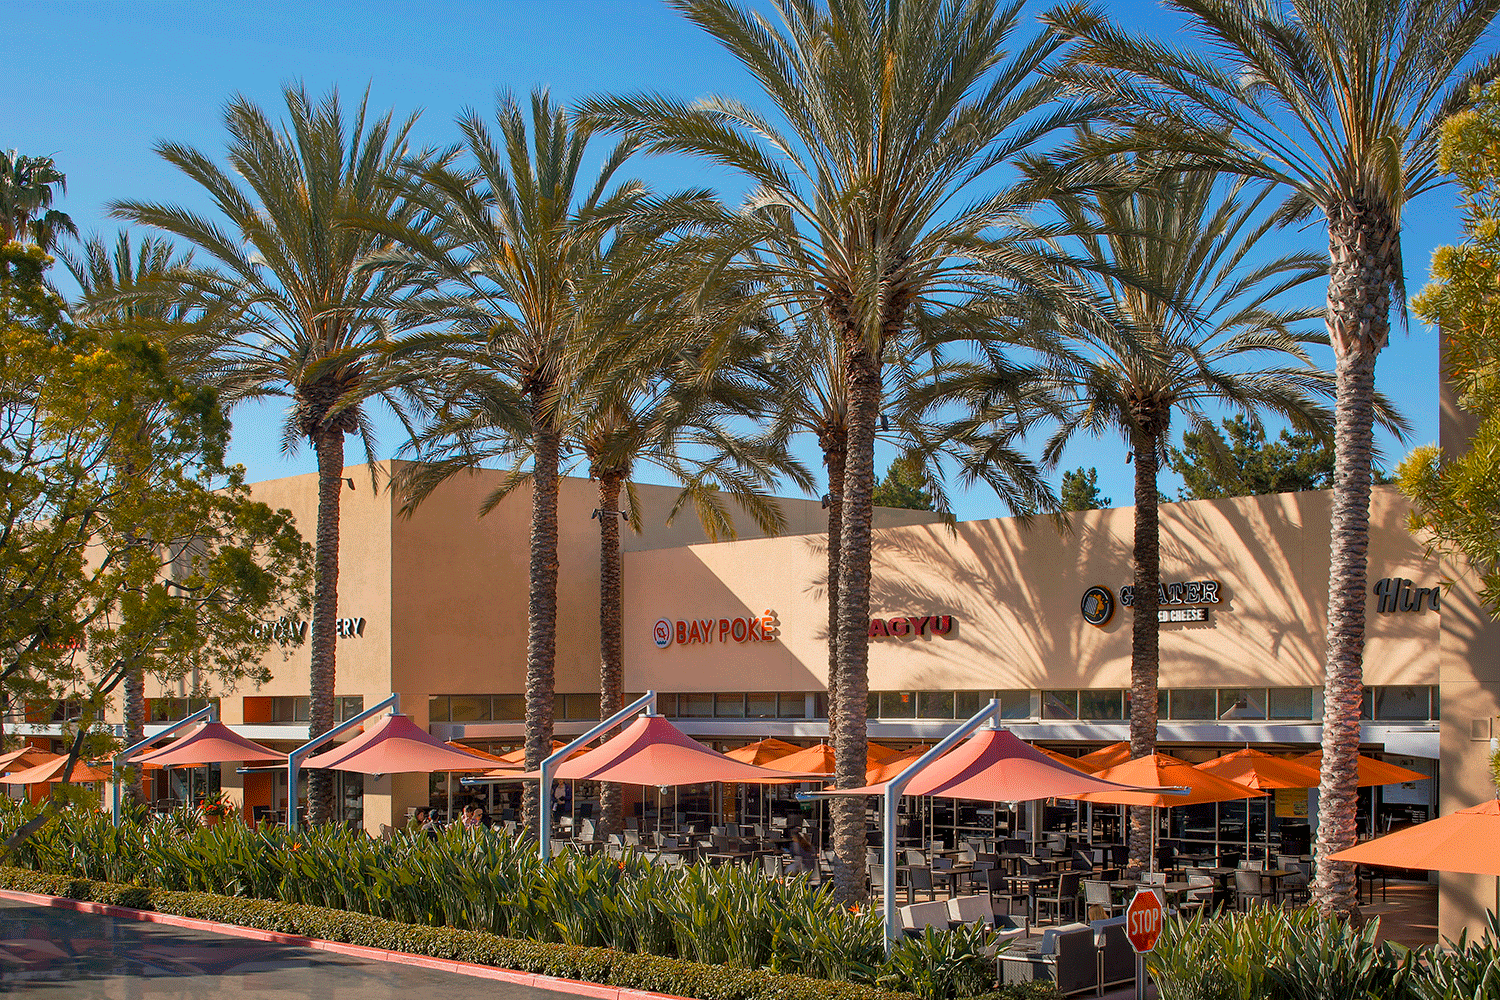  Daytime exterior view of Sand Canyon Plaza